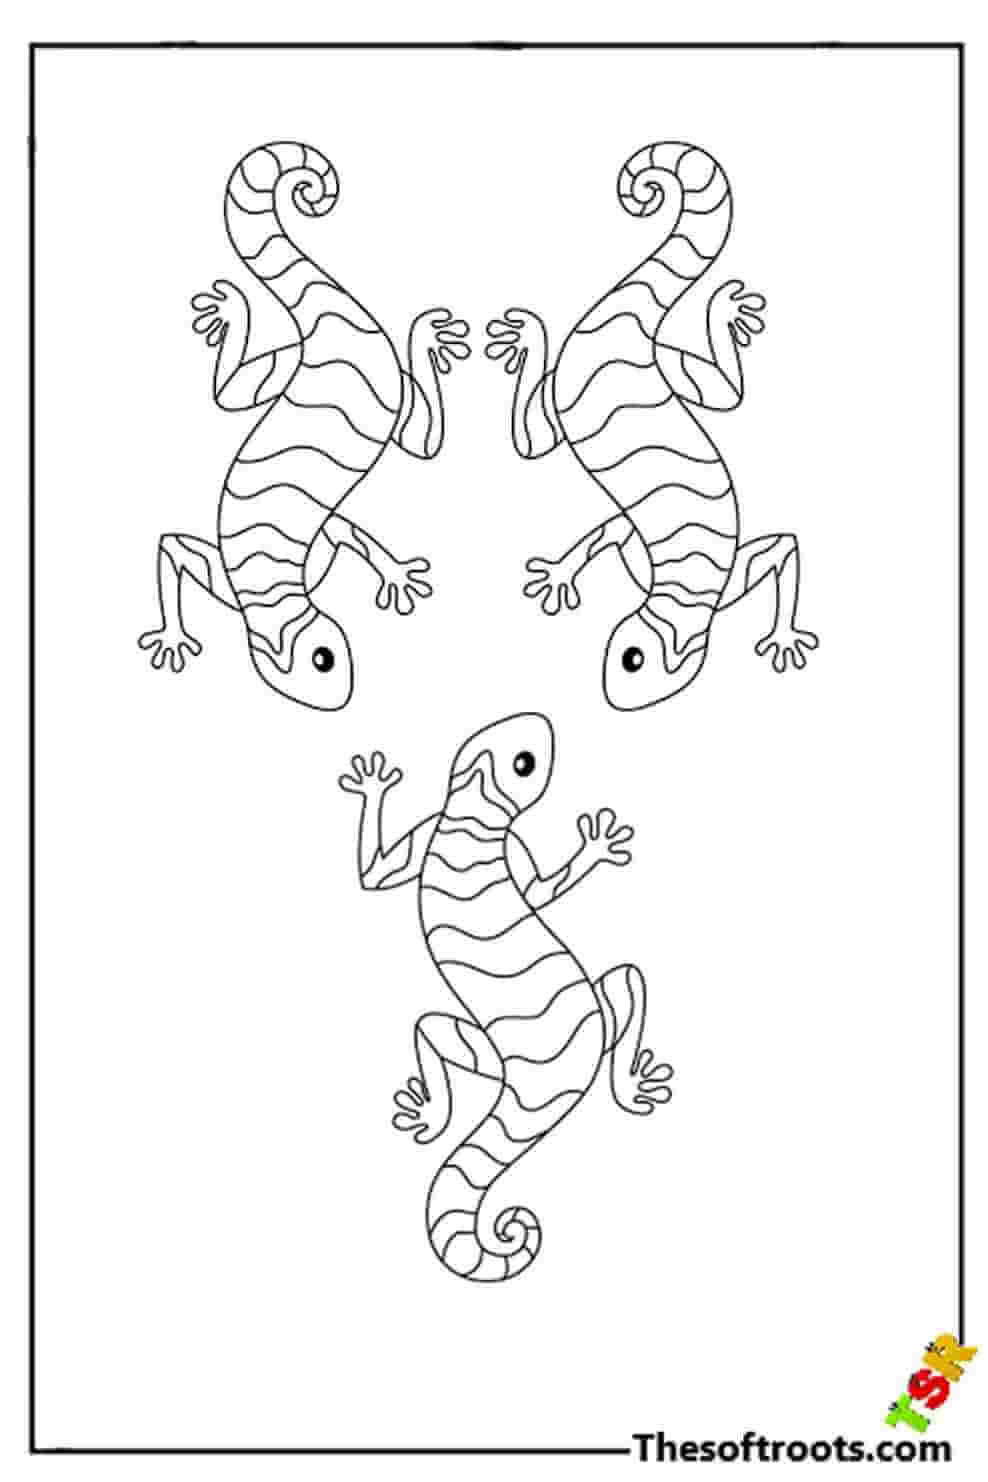 3 lizards coloring pages